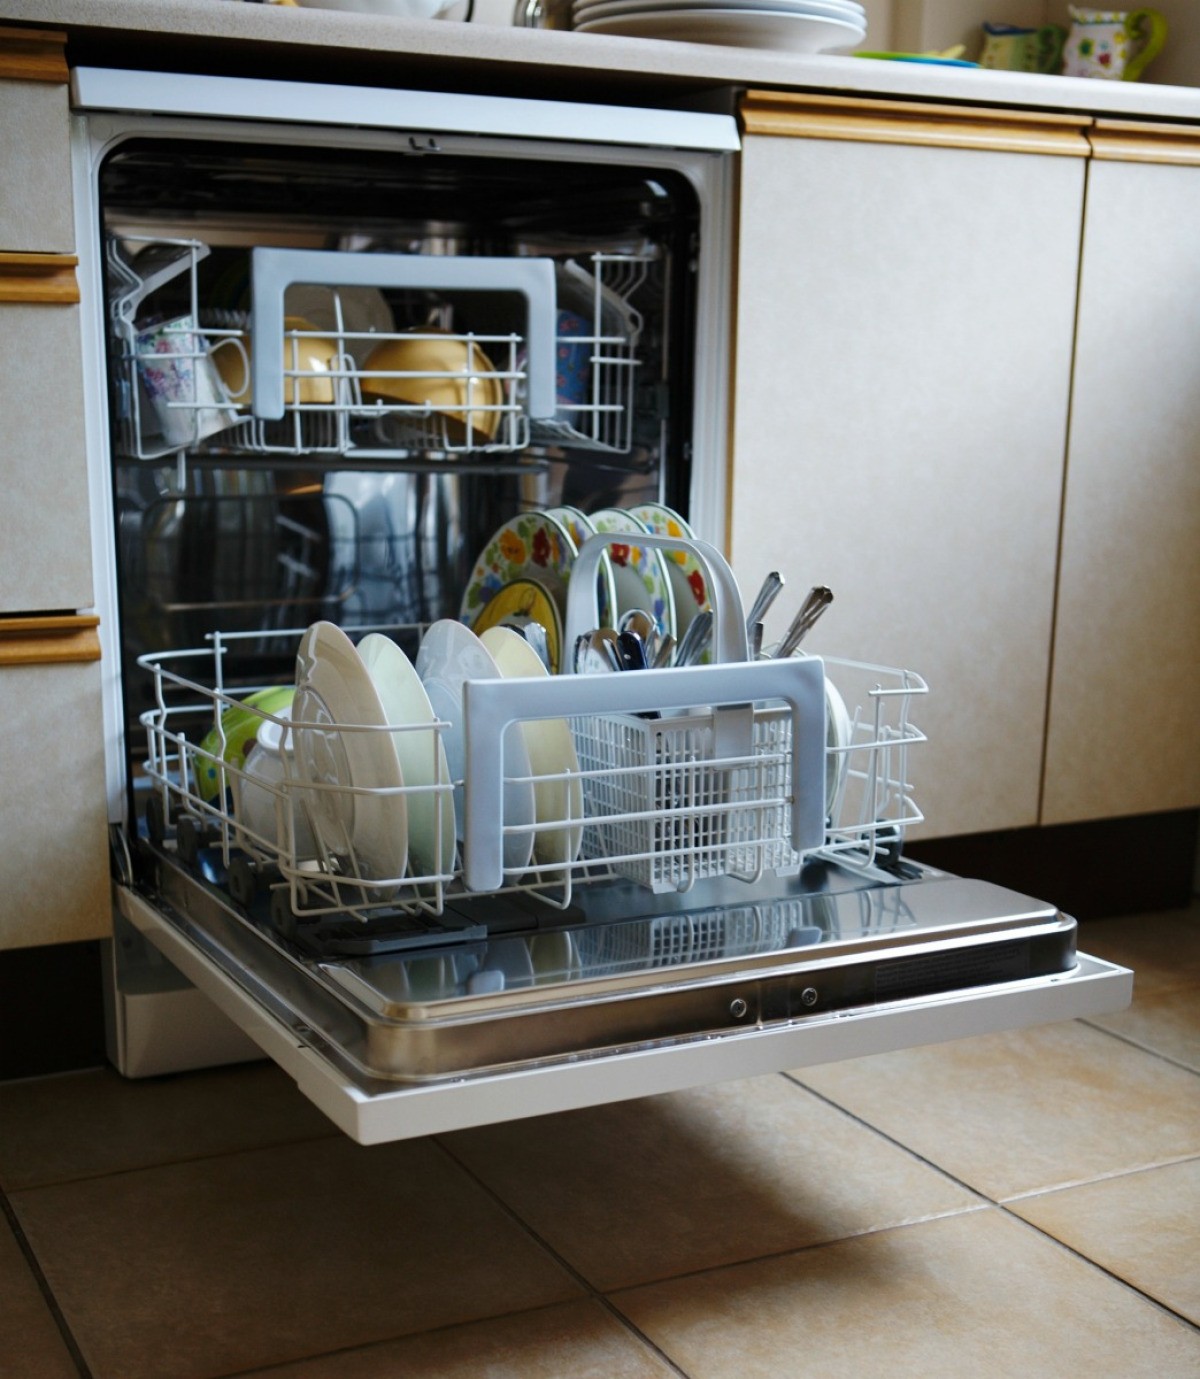 Best Dishwashers For Well Water 2020